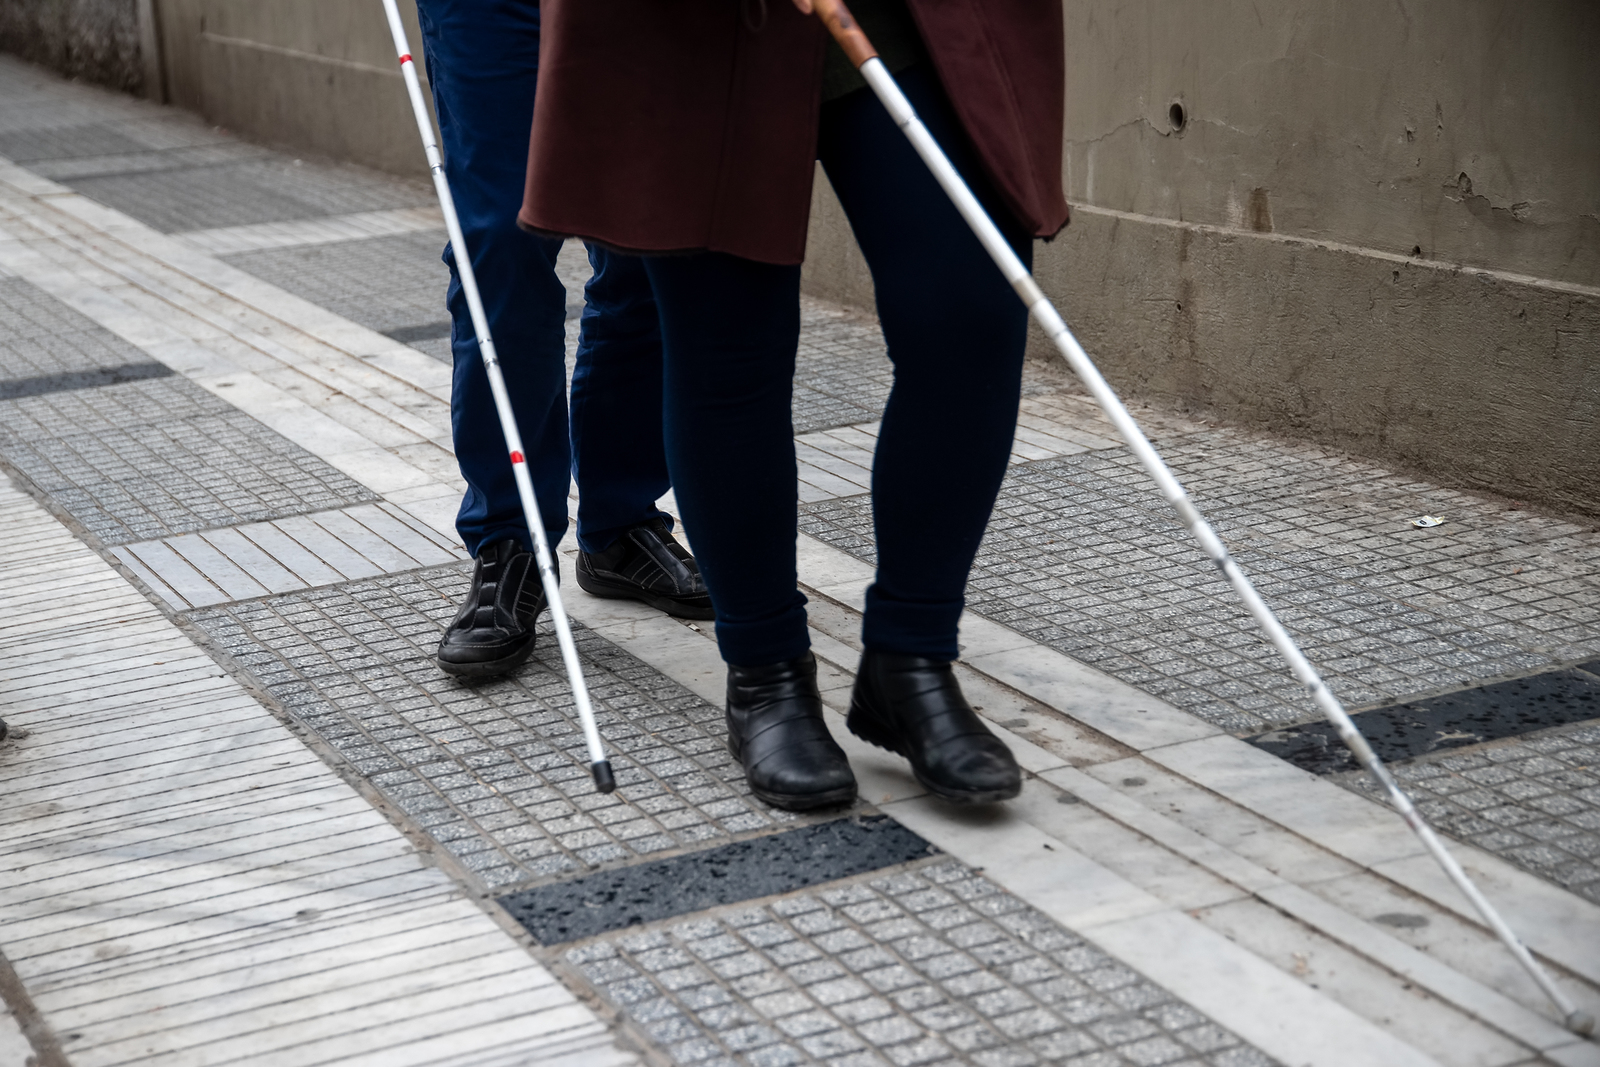 A Blind couple walking down a path, both of them are using white mobility canes.